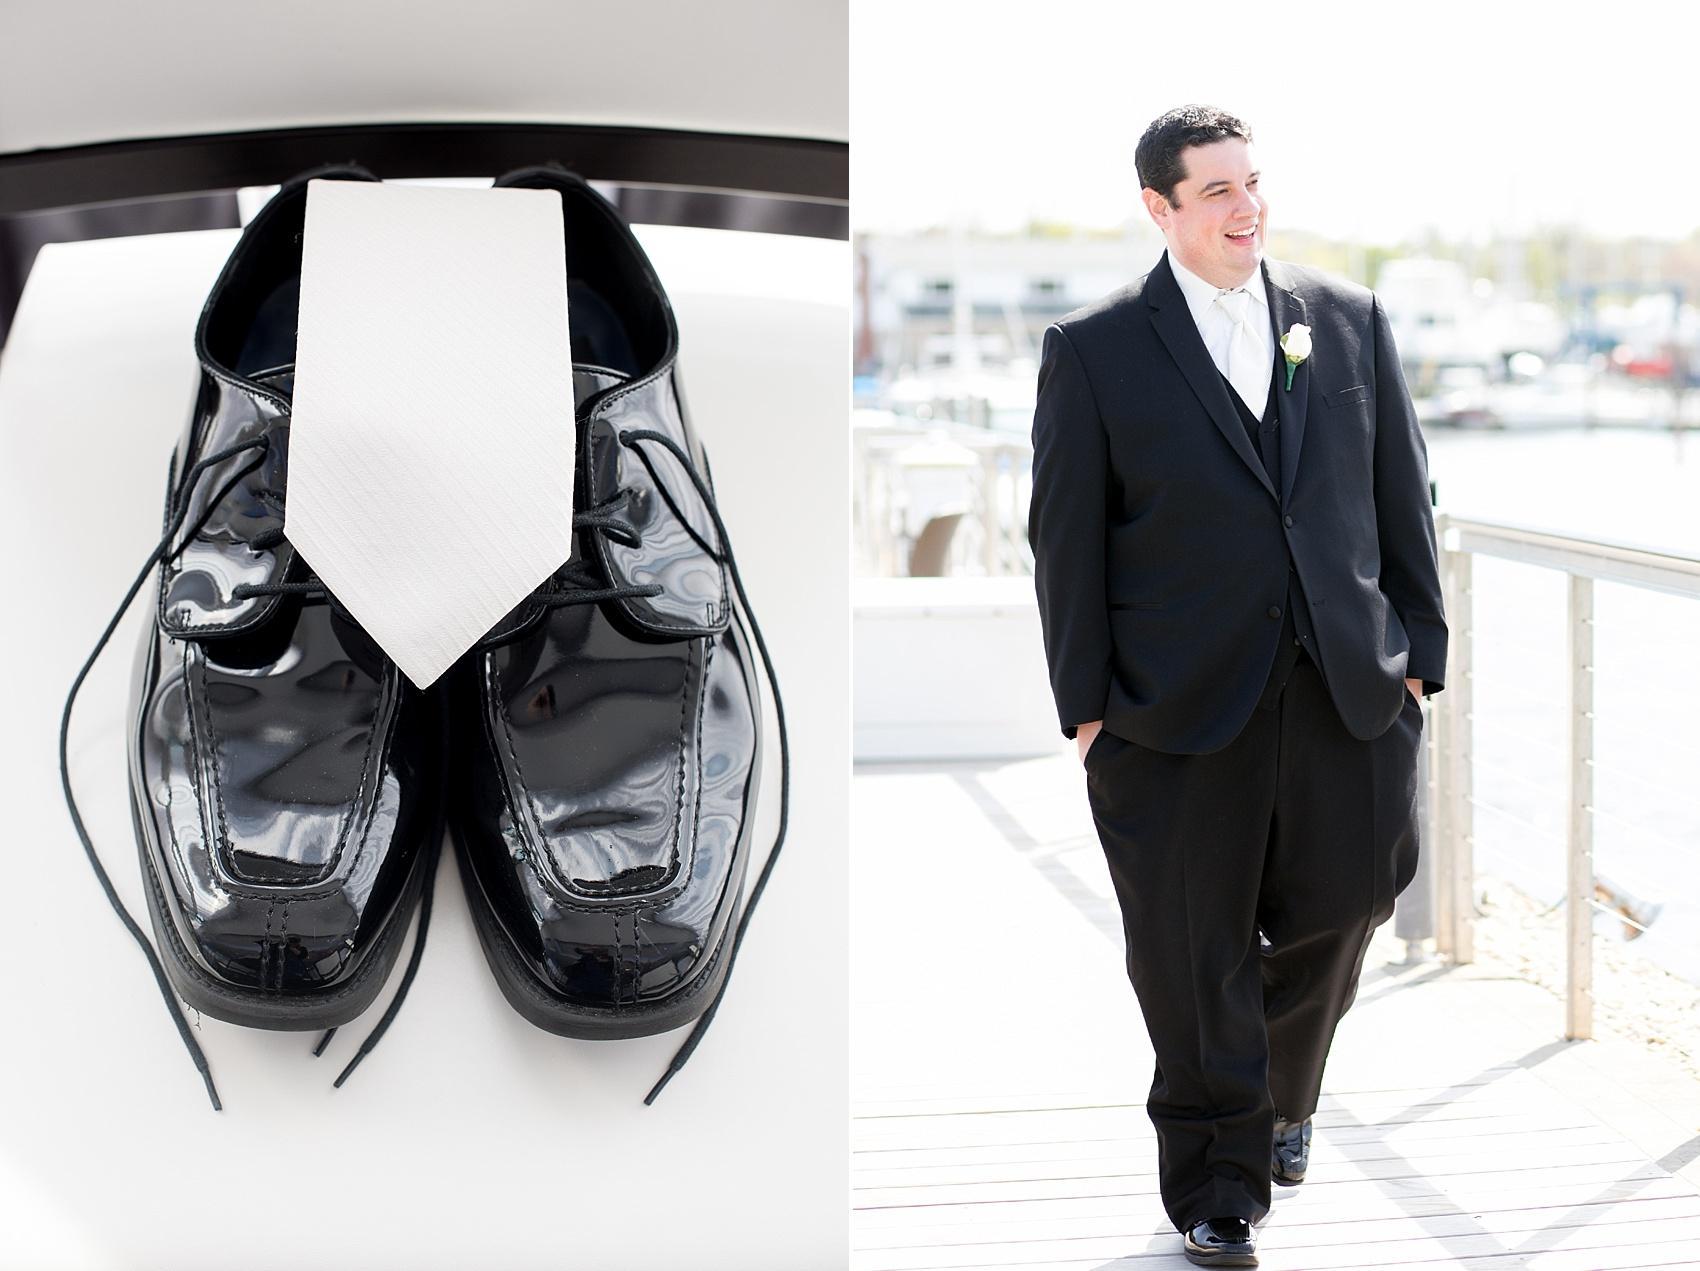 Photos by Mikkel Paige Photography for a wedding at Harbor Club on Long Island. Groom details and white tie for a ceremony overlooking the waterfront.